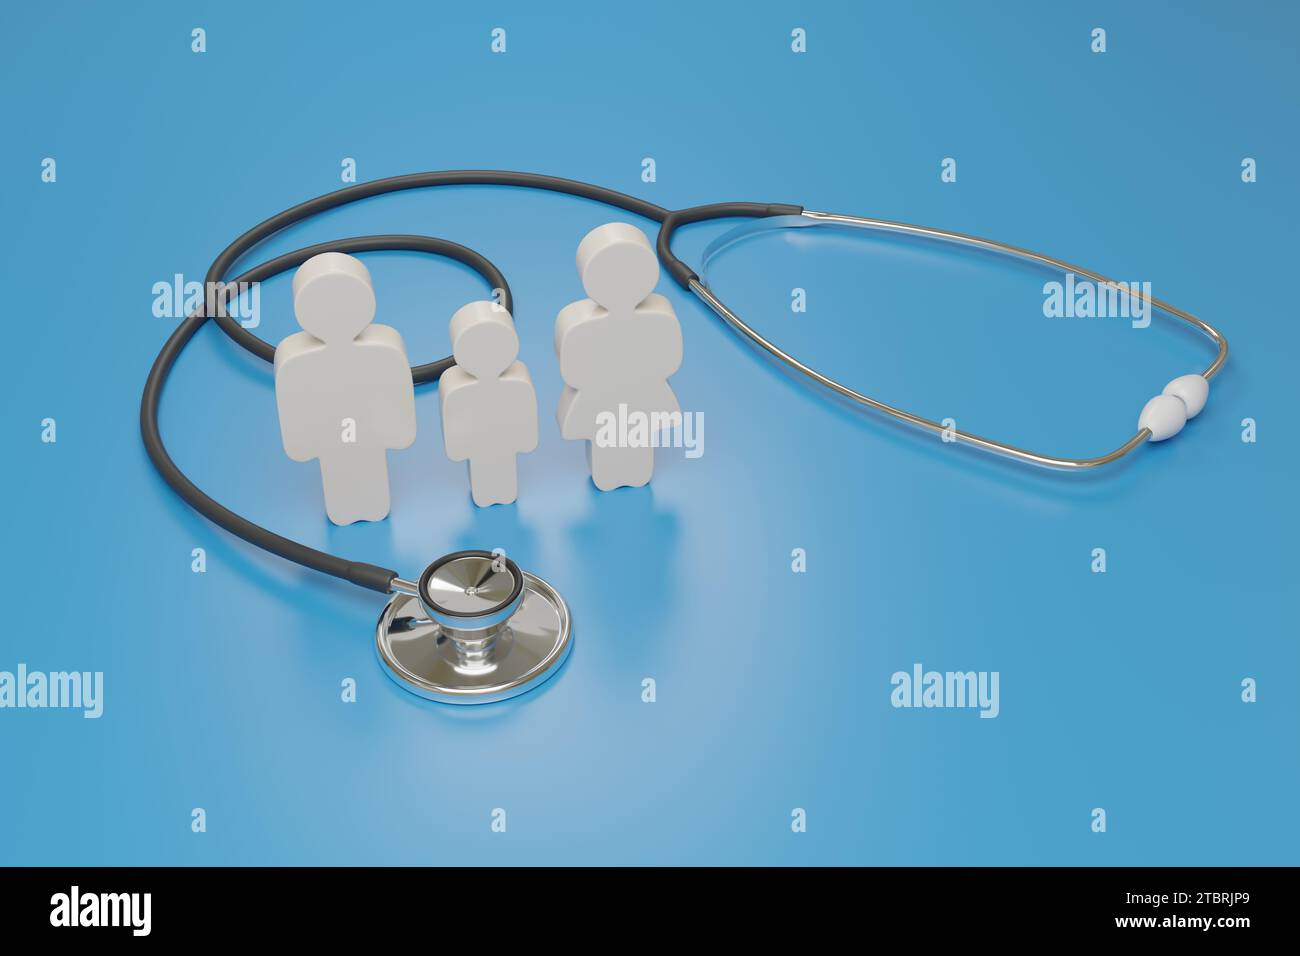 Figurines of a family next to a stethoscope on blue blue background. 3d illustration. Stock Photo